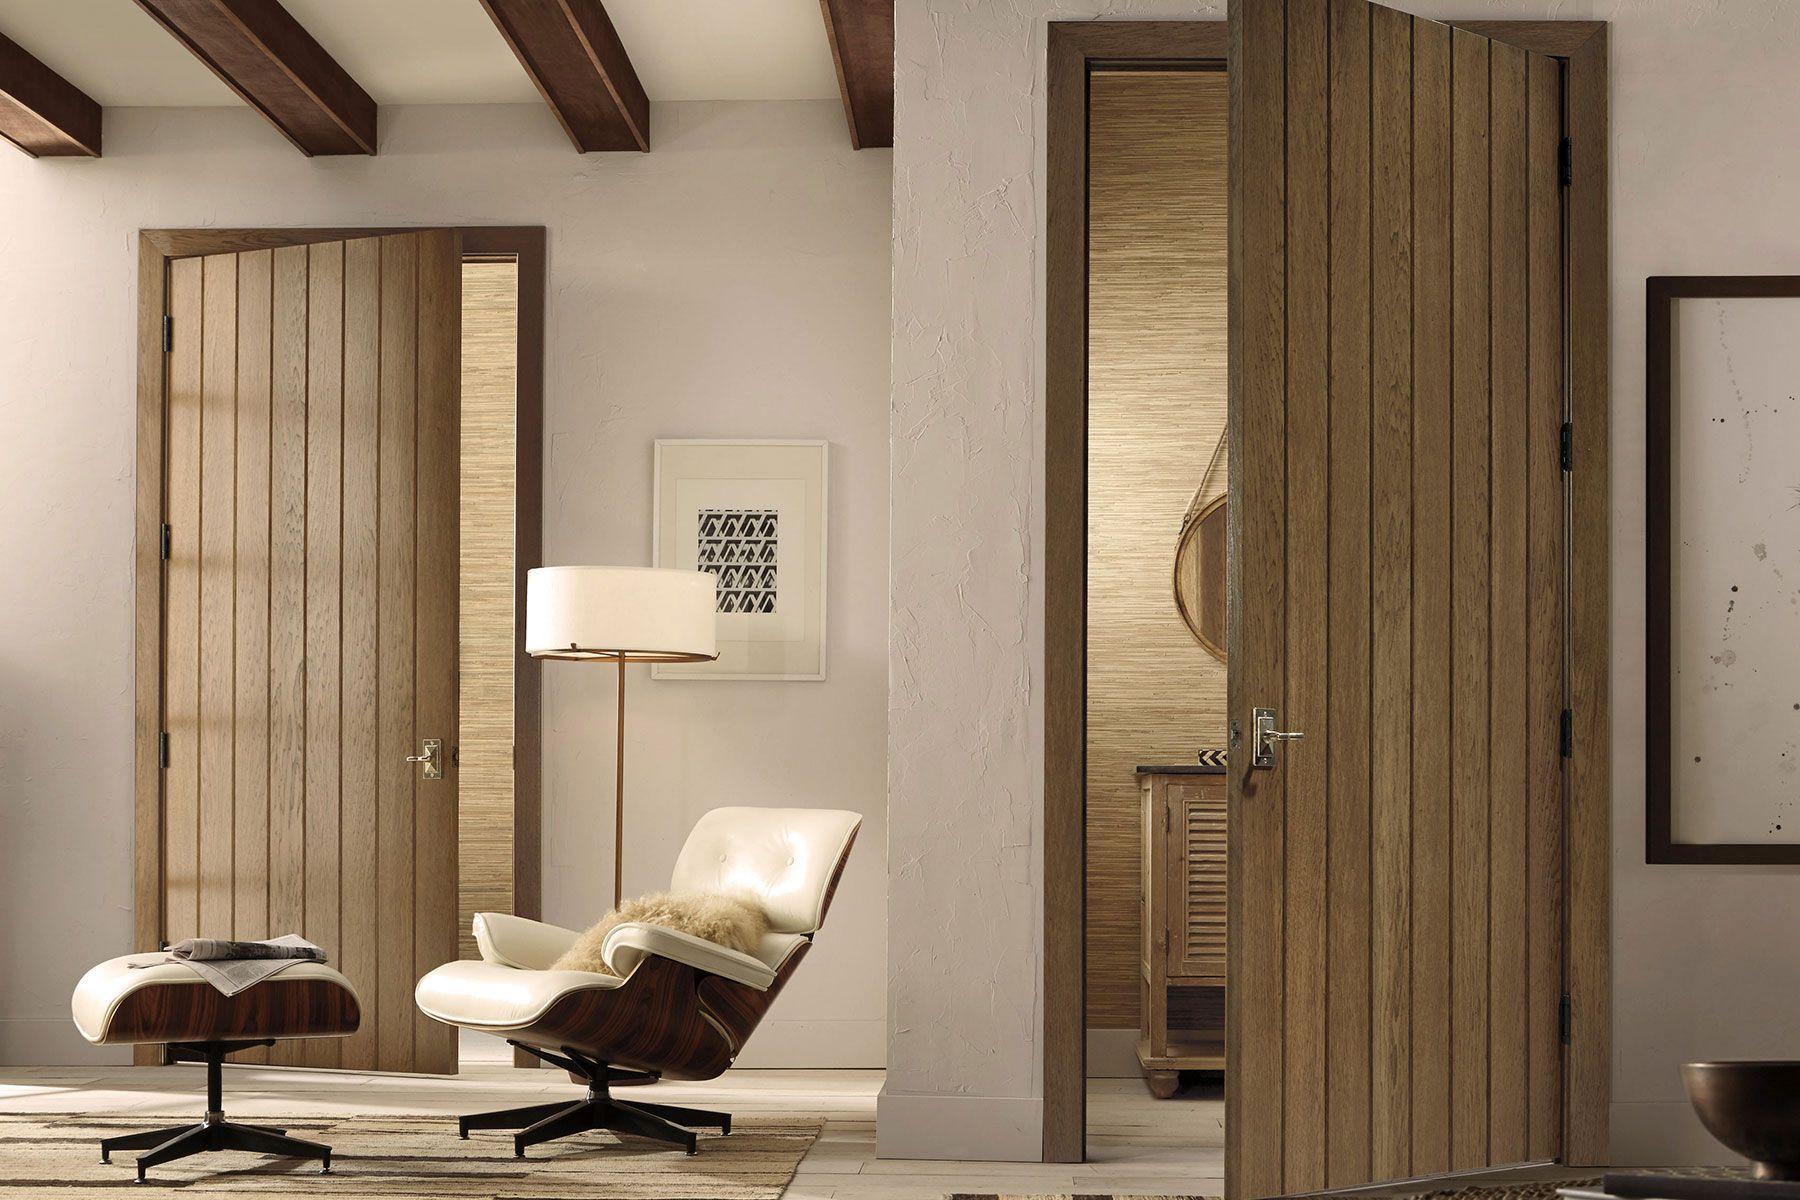 two wooden plank interior doors with vertical grooves